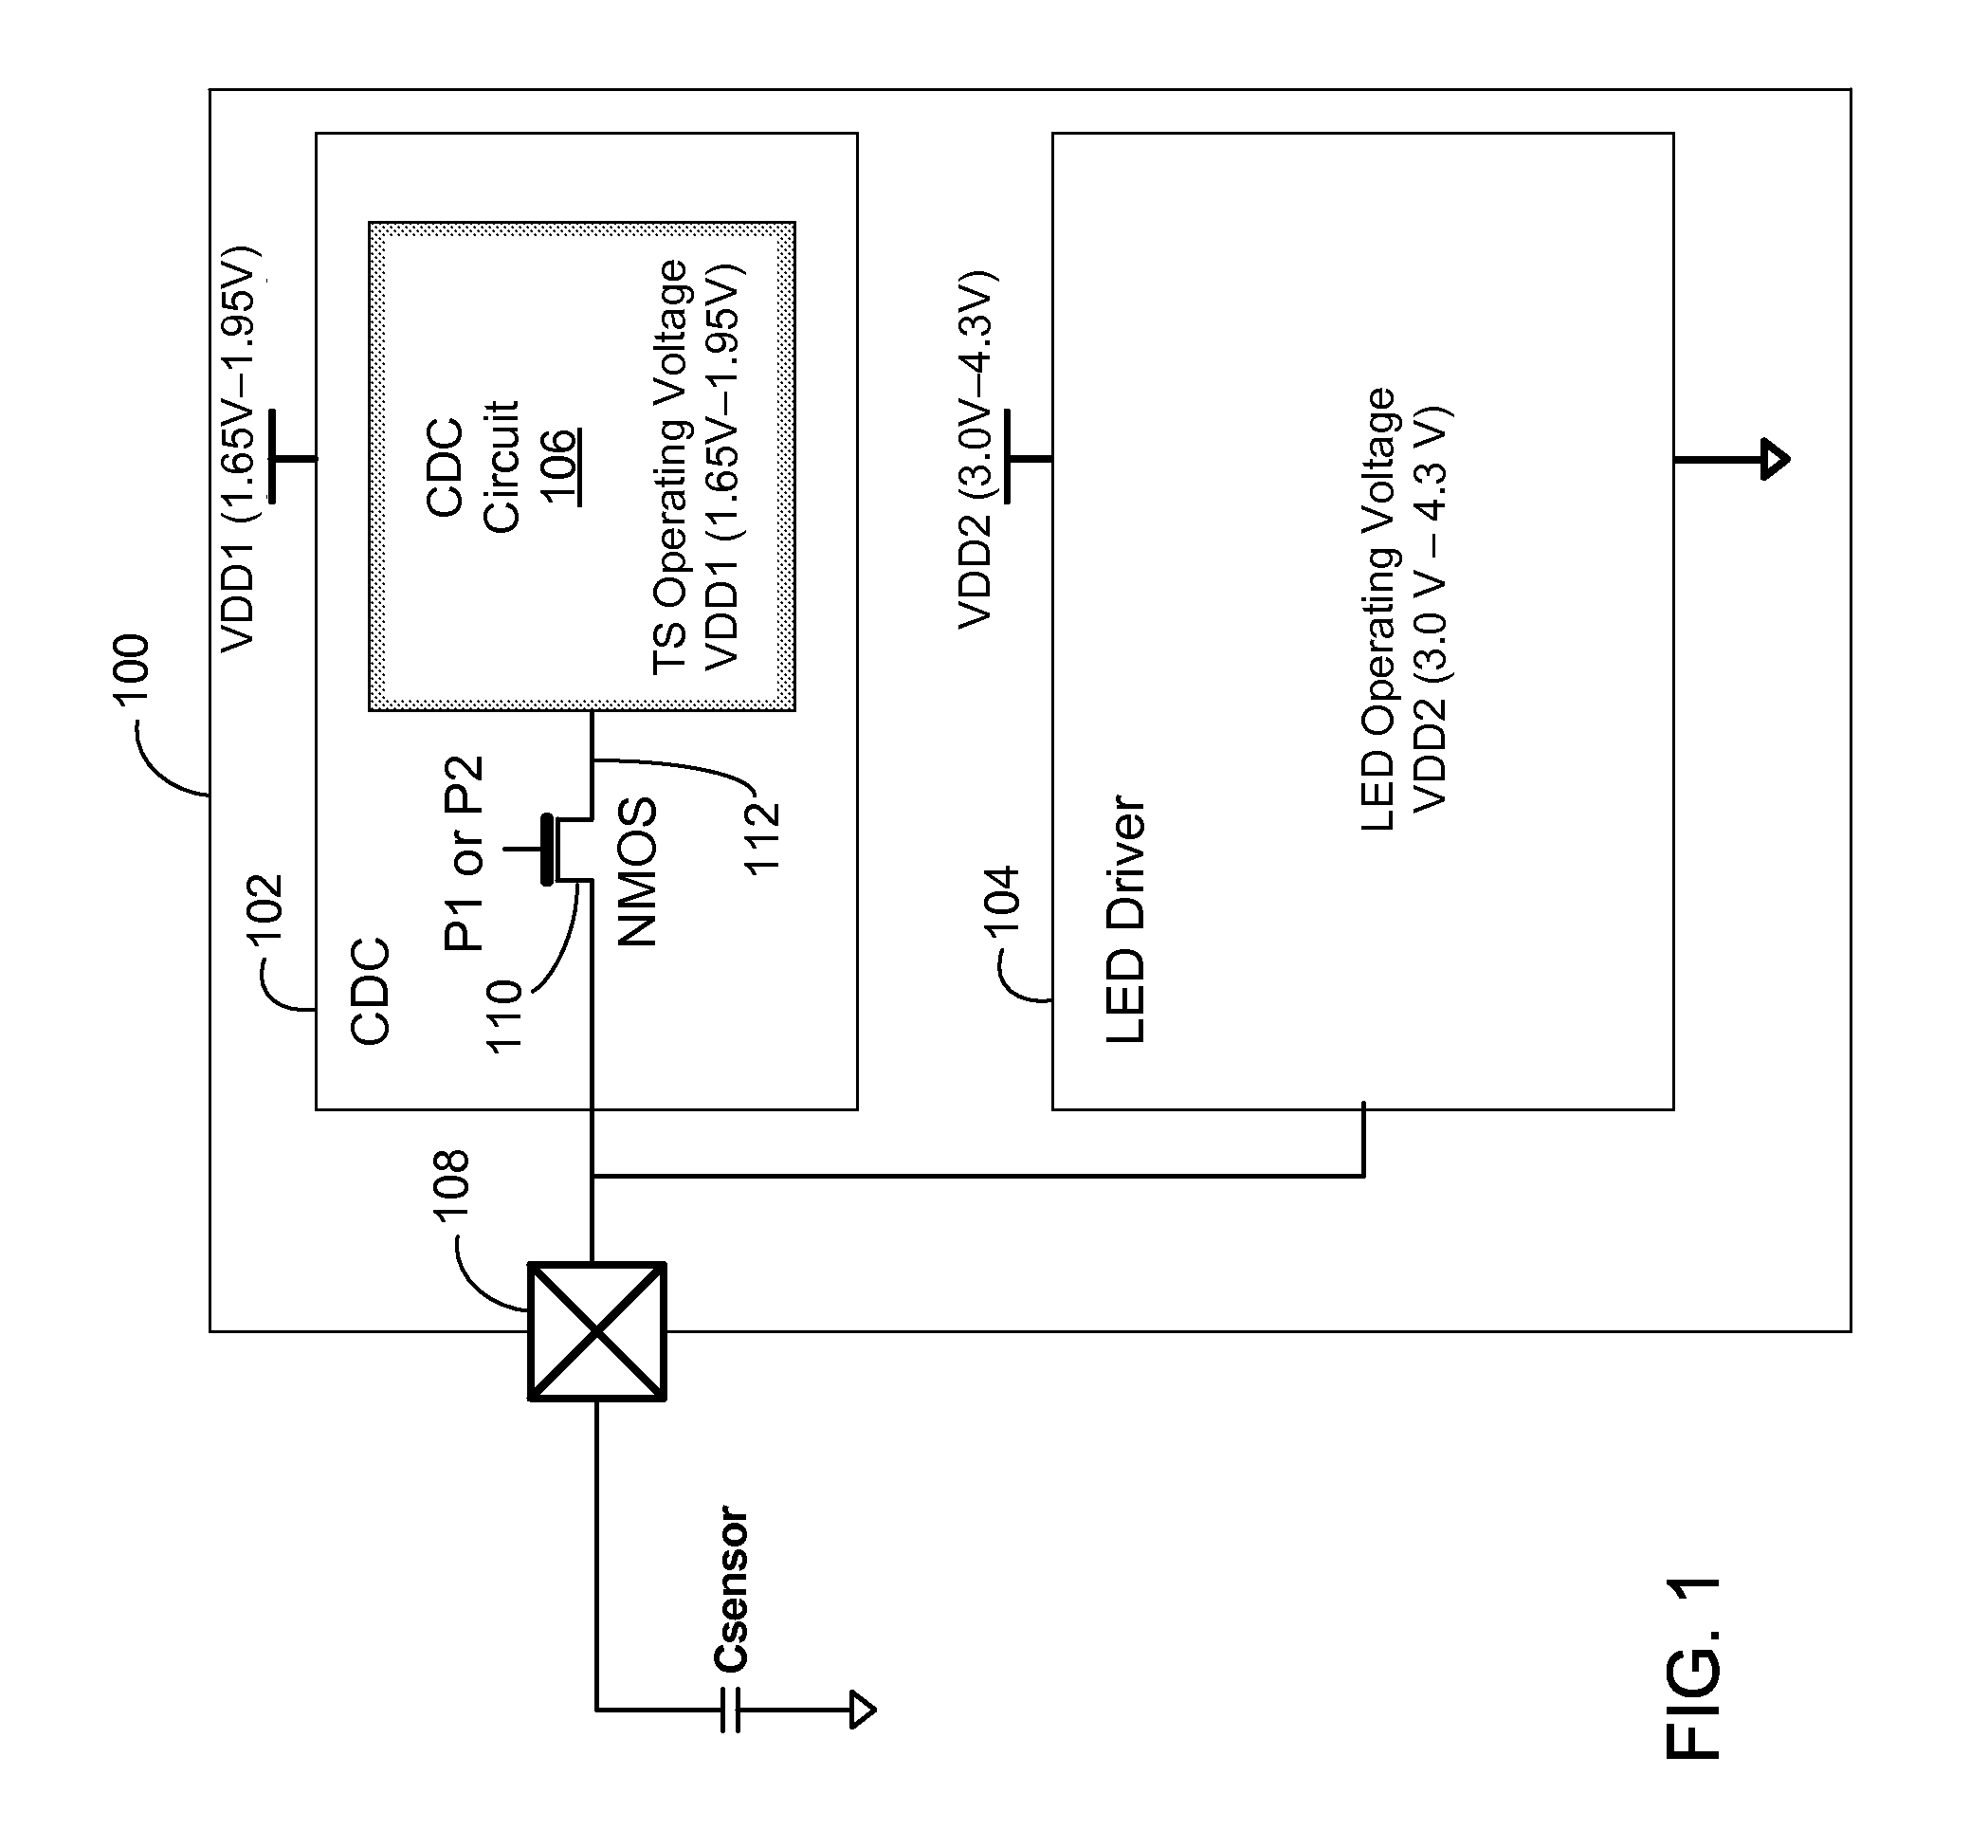 Combined touch sensor and LED driver with n-type mosfet protecting touch sensor